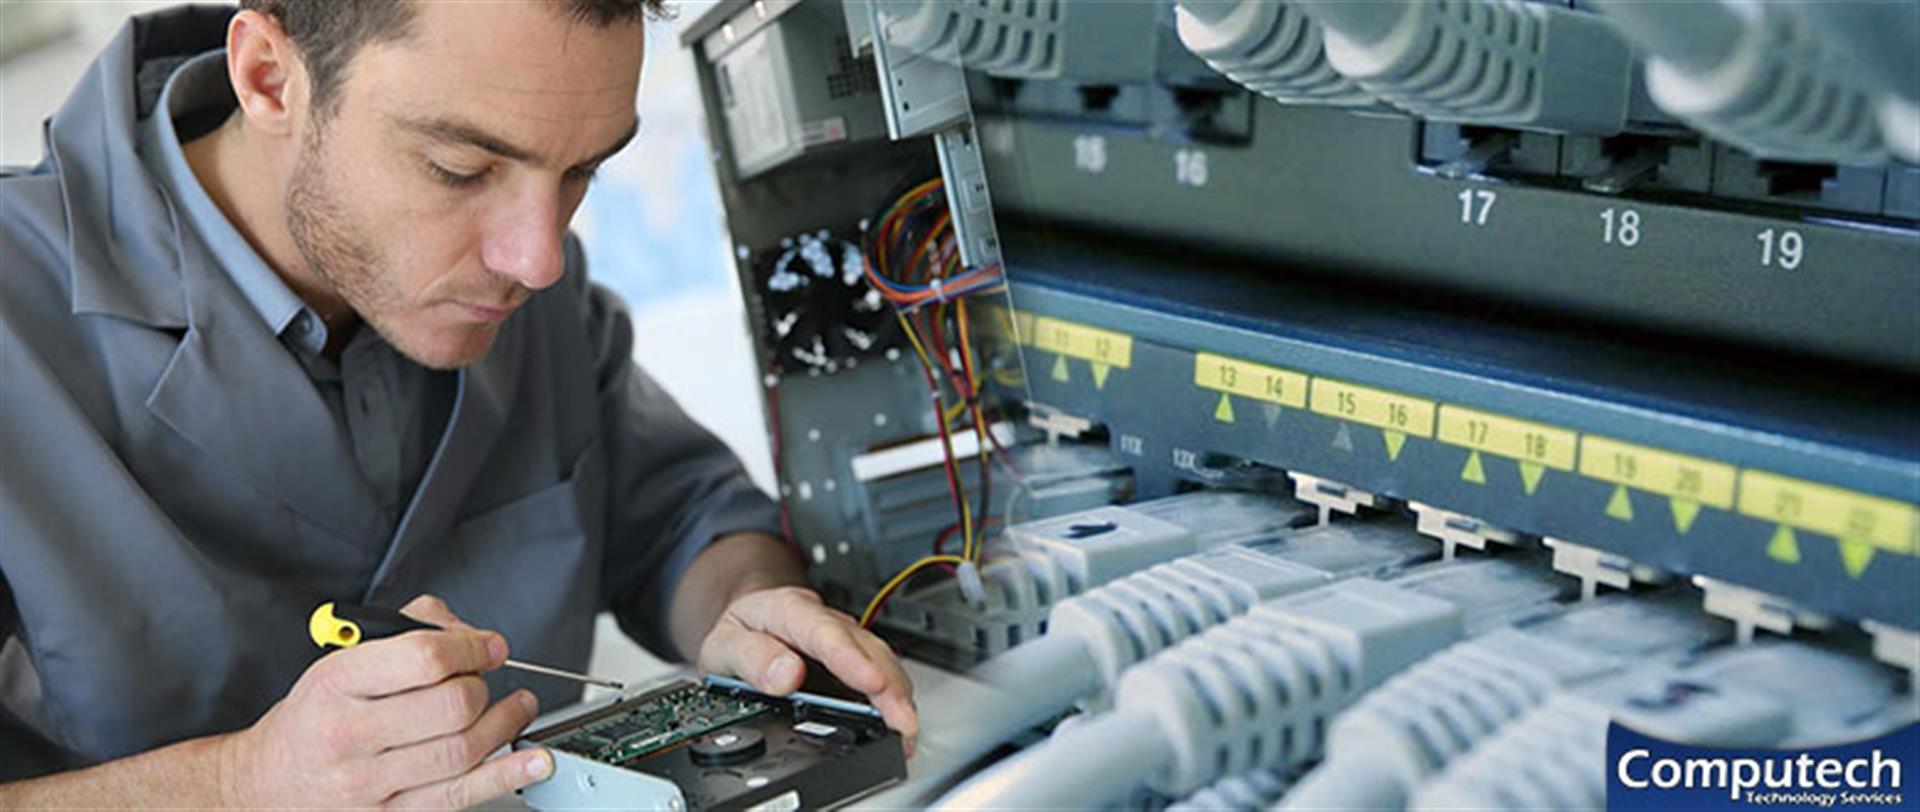 Herndon Virginia Onsite Computer & Printer Repairs, Network, Voice & Data Cabling Services